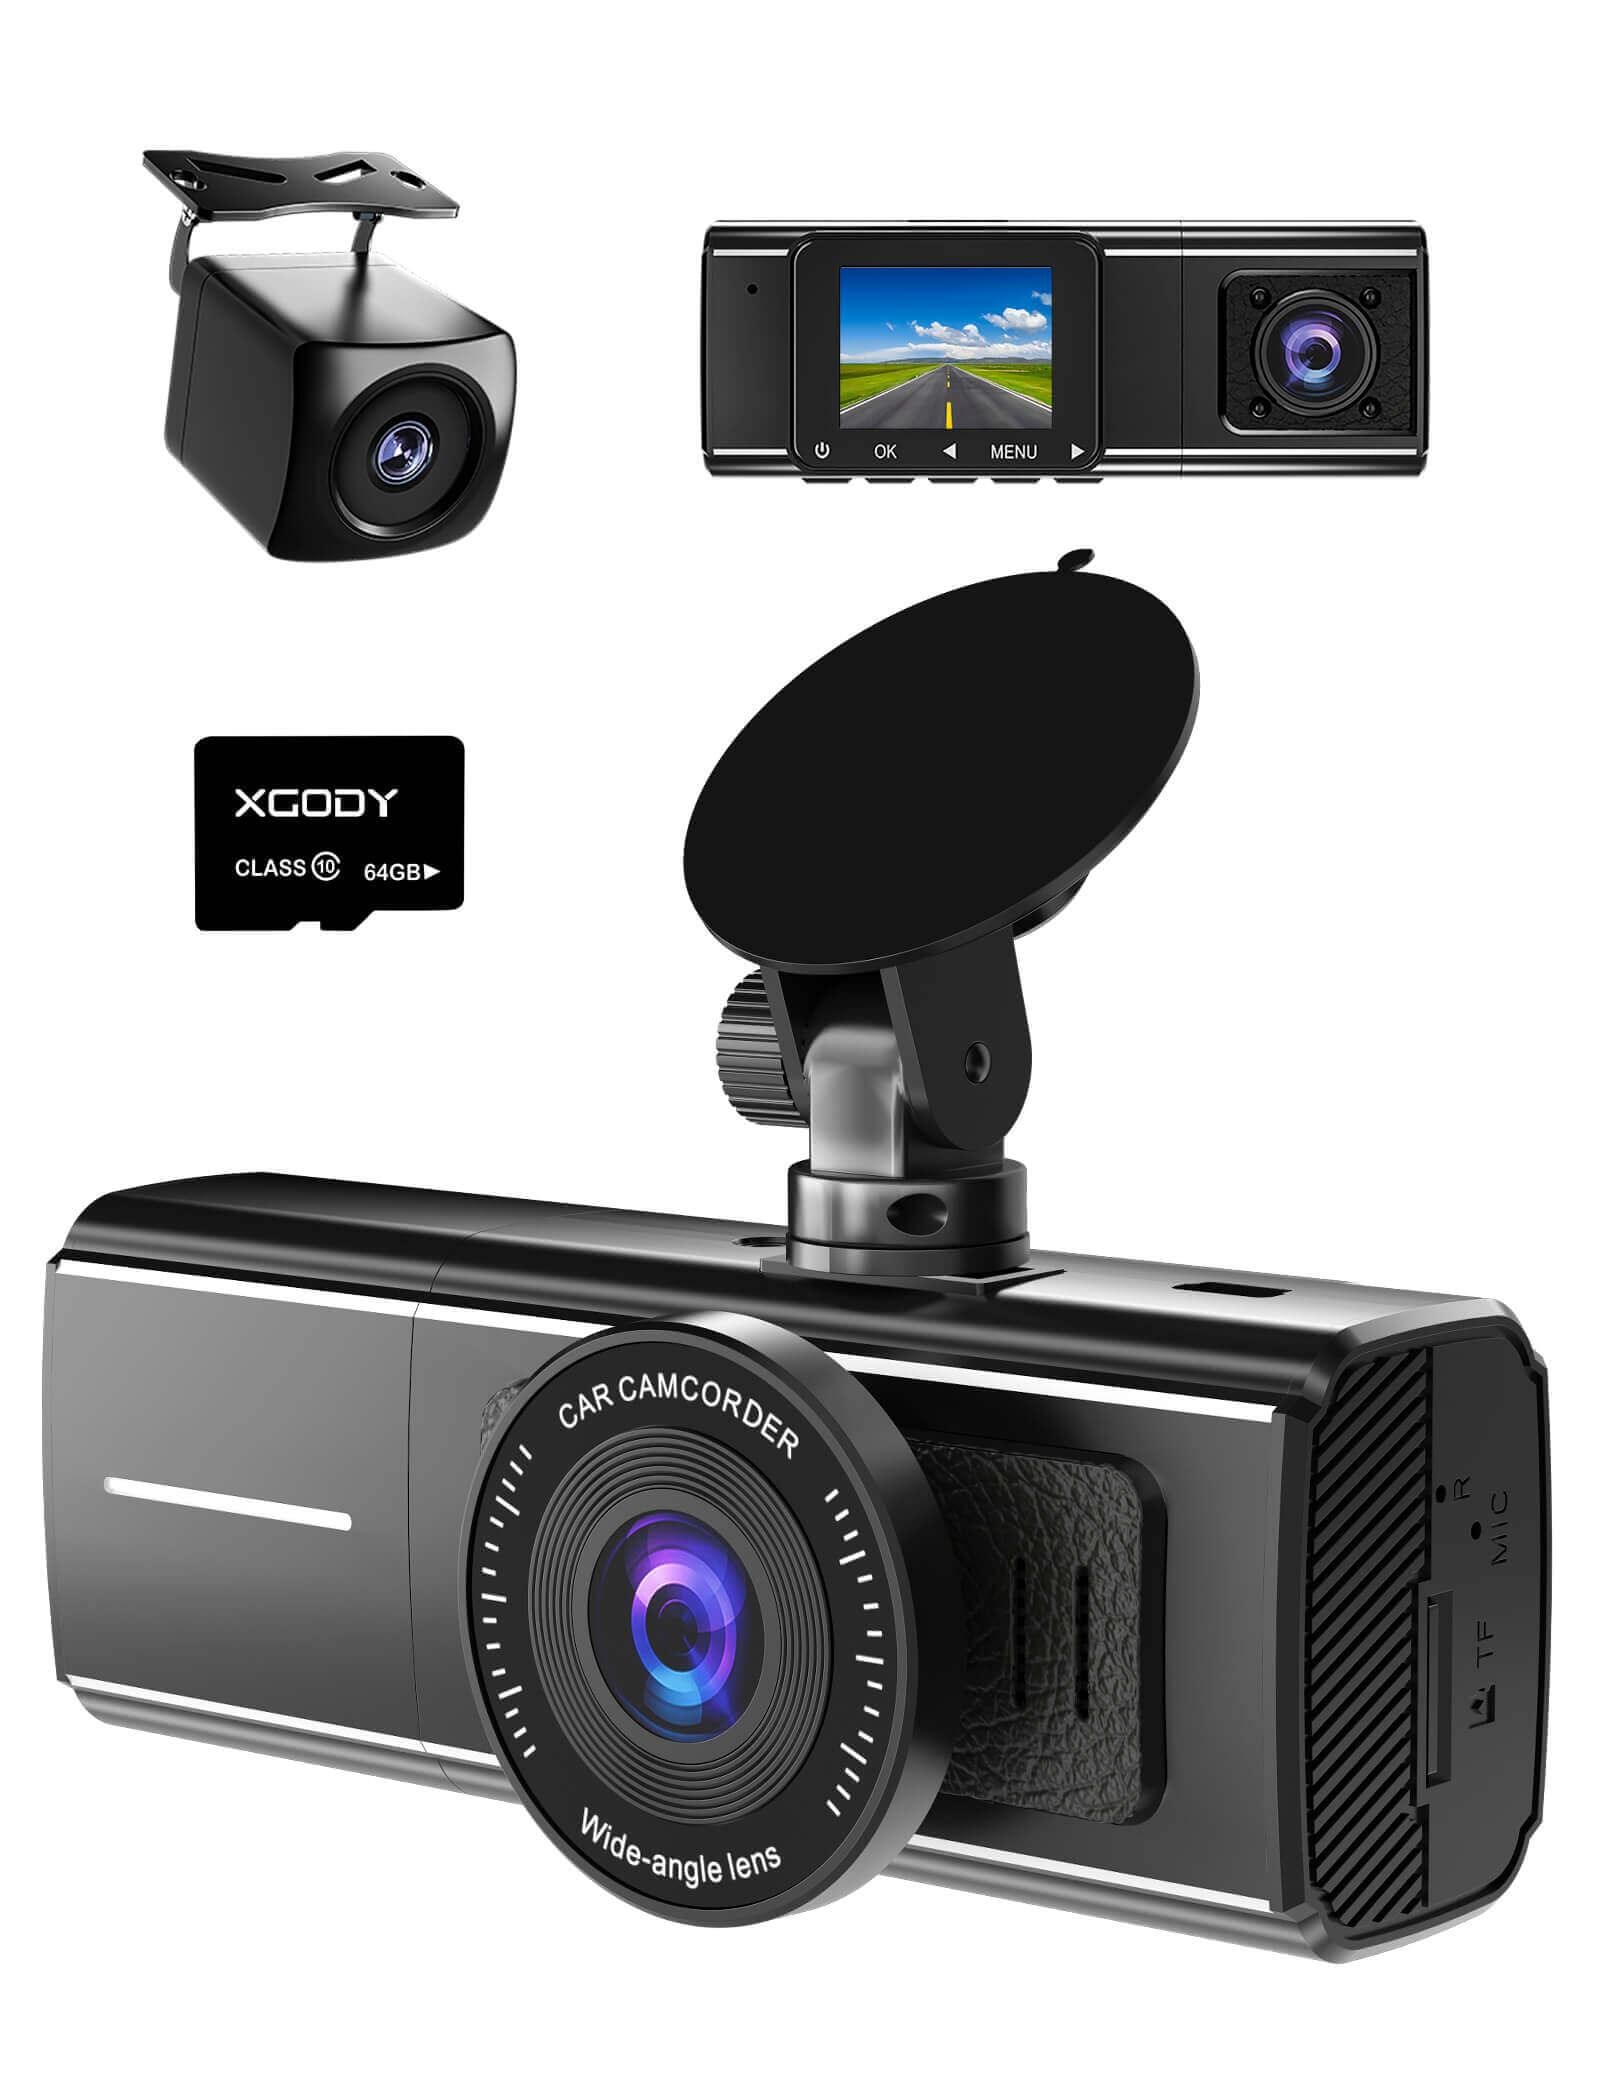 Cost-effective and Most worthwhile XGODY Dash Cam Q15 Plus HD 3 Channel IR Night Vision Recorder, G-Sensor, Parking Mode - XGODY 